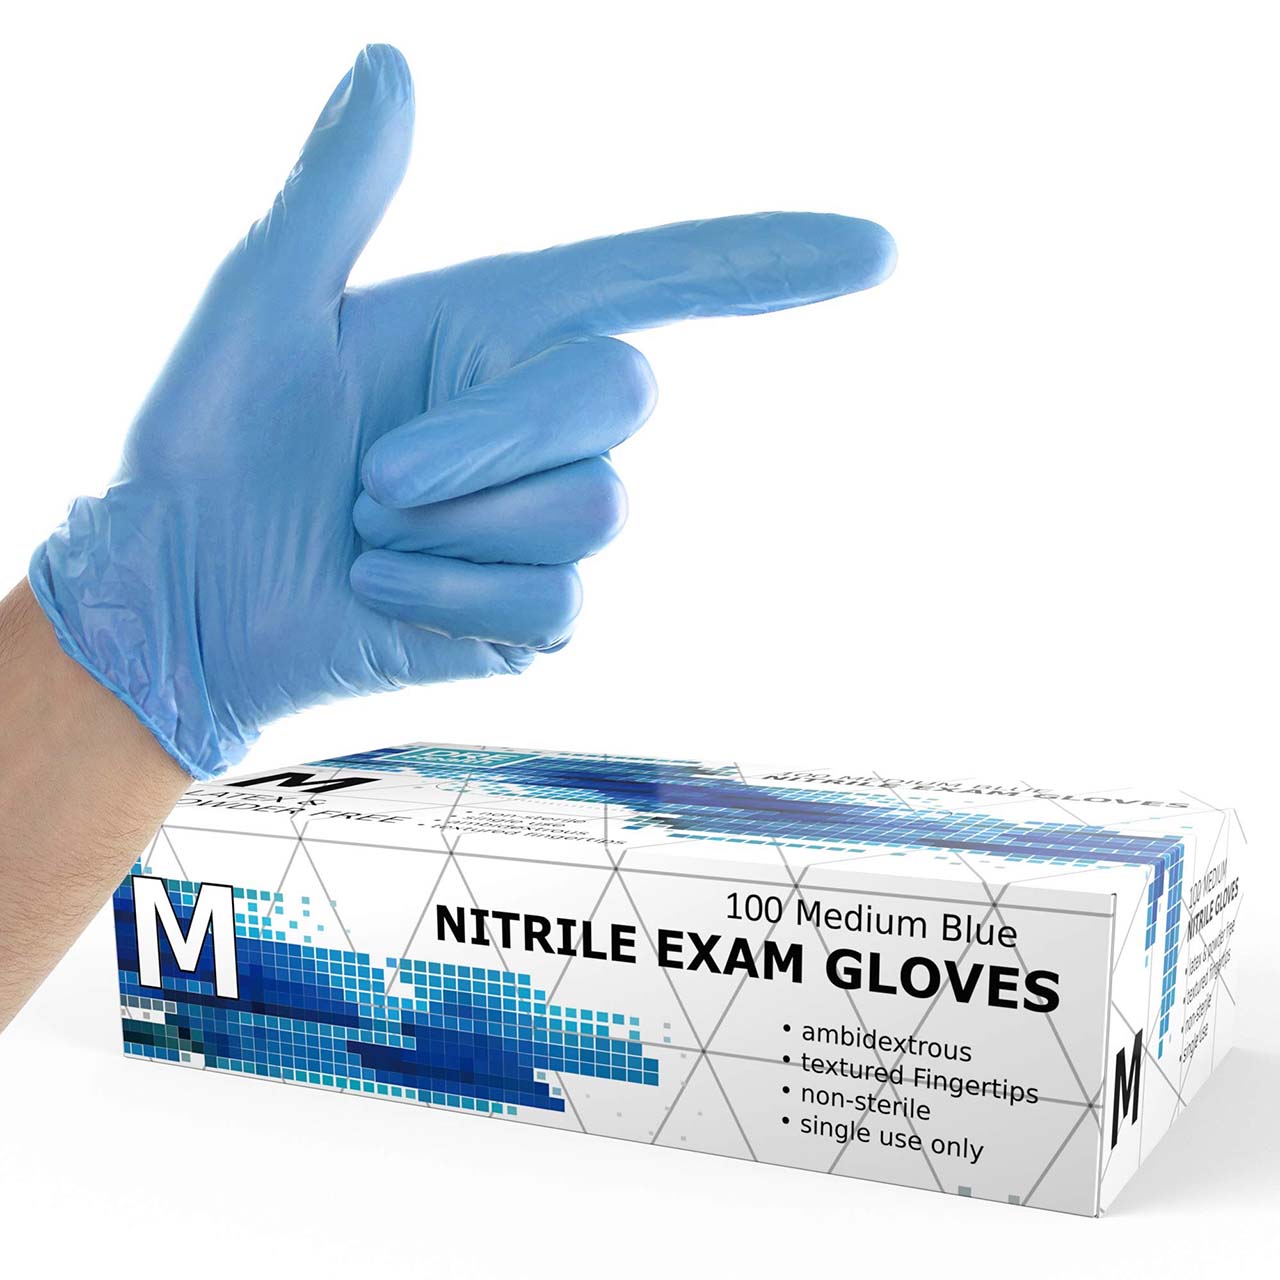 A gloved hand points to the right over a box of Dre Health Nitrile exam gloves.